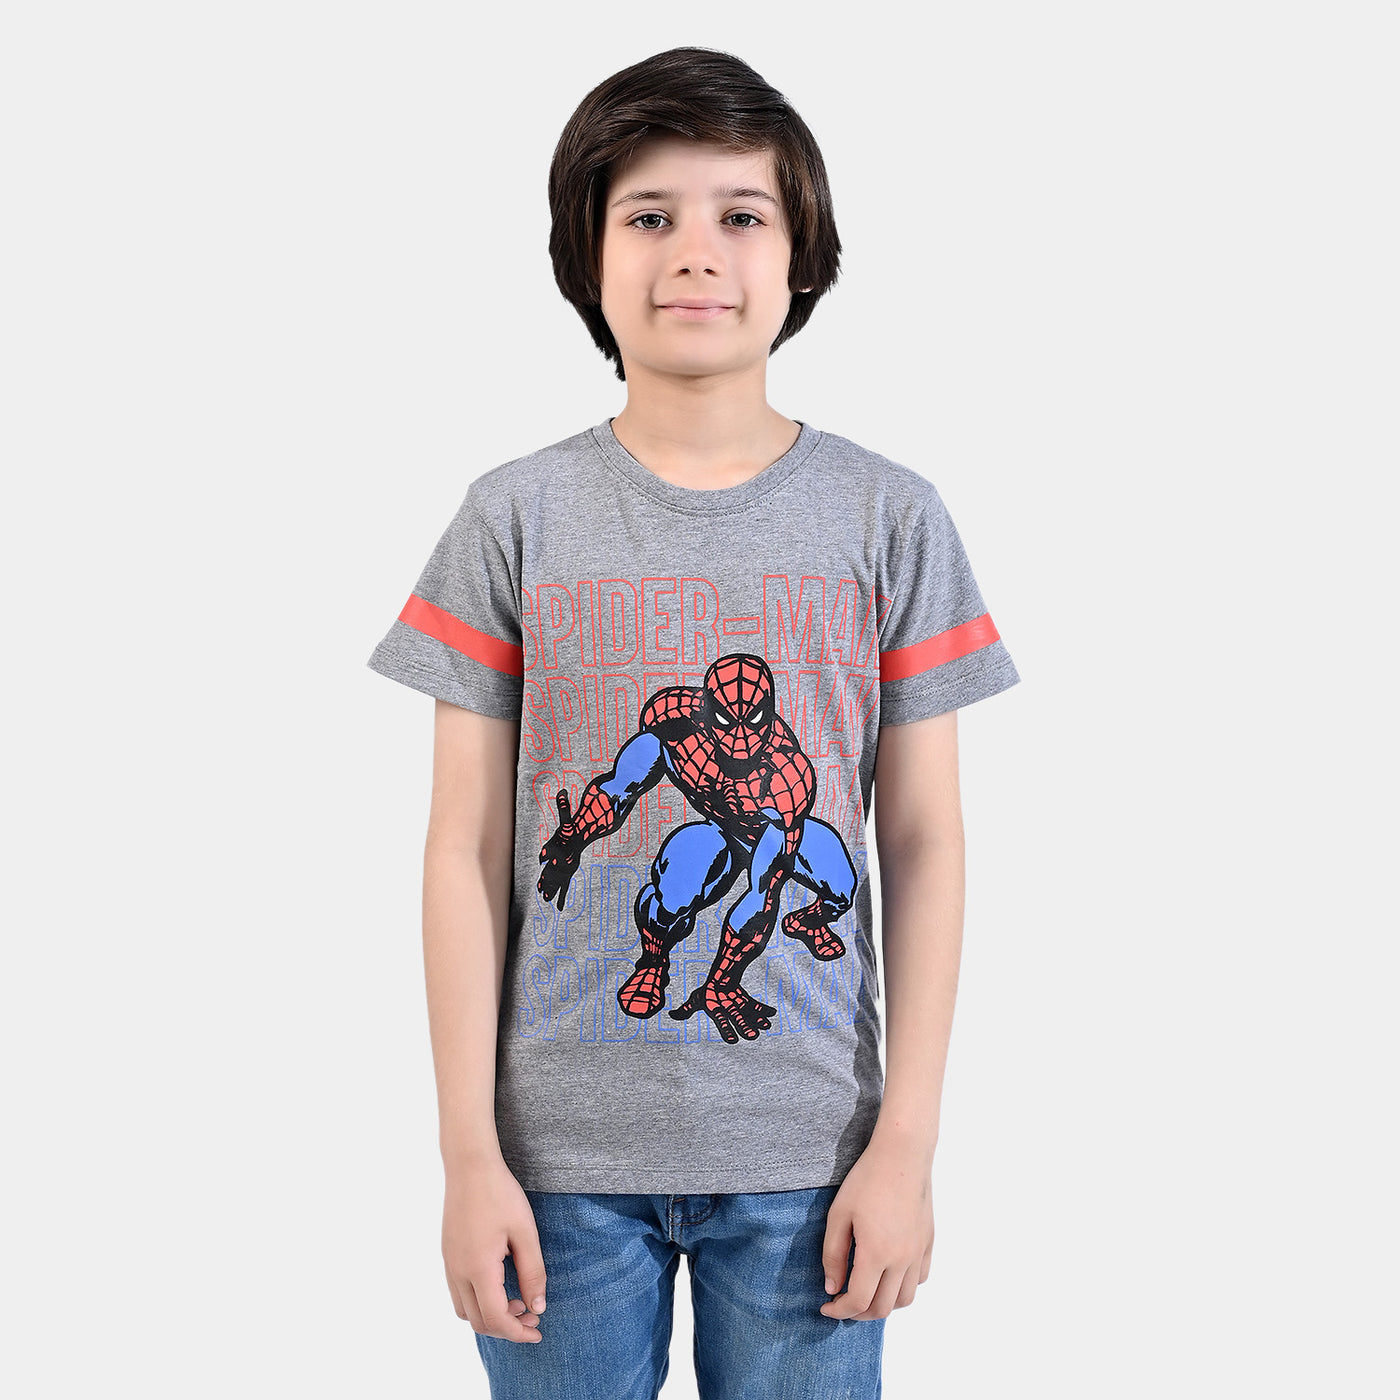 Boys Cotton Jersey T-Shirt H/S Character-Htr.Grey